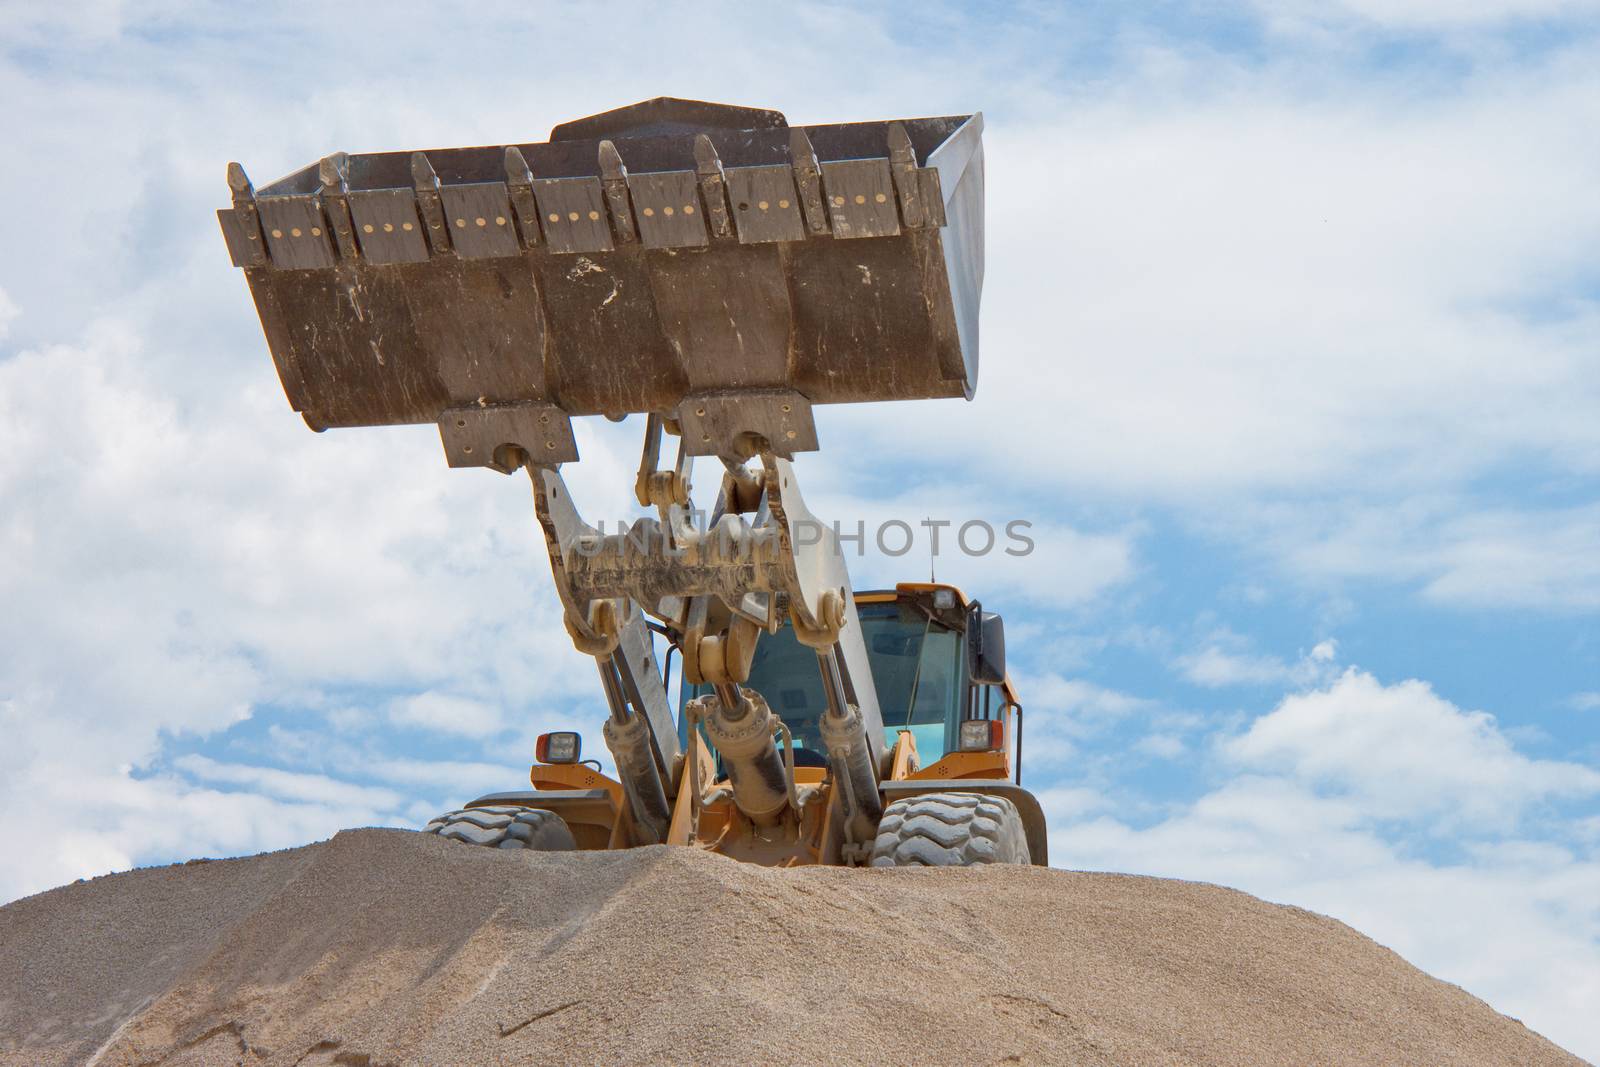 Yellow excavator on a construction site against blue sky